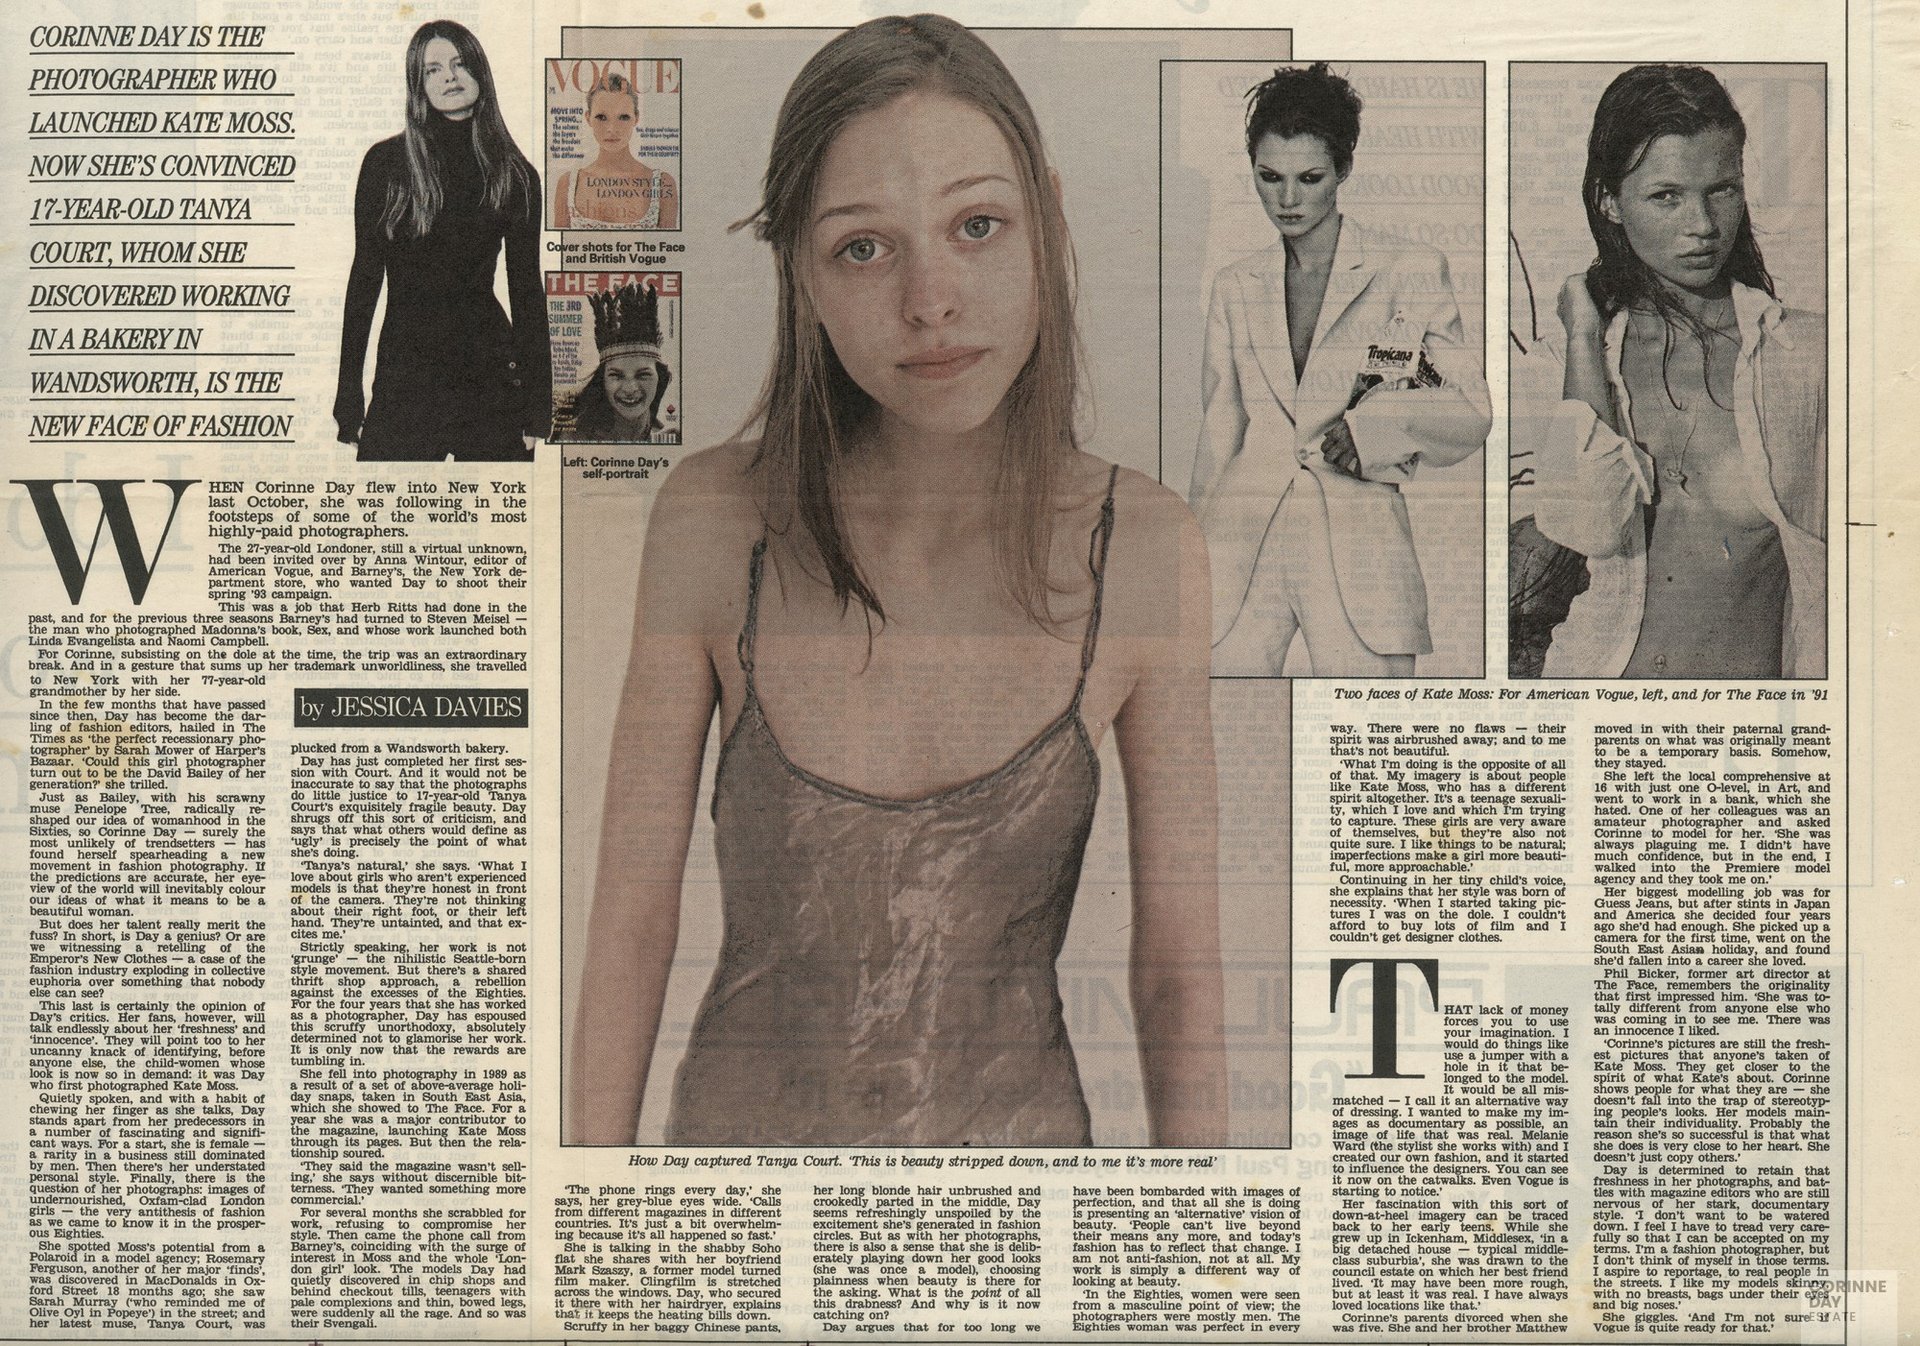 The new starvation look, Daily Mail, 1 Apr 1993 — Image 2 of 2